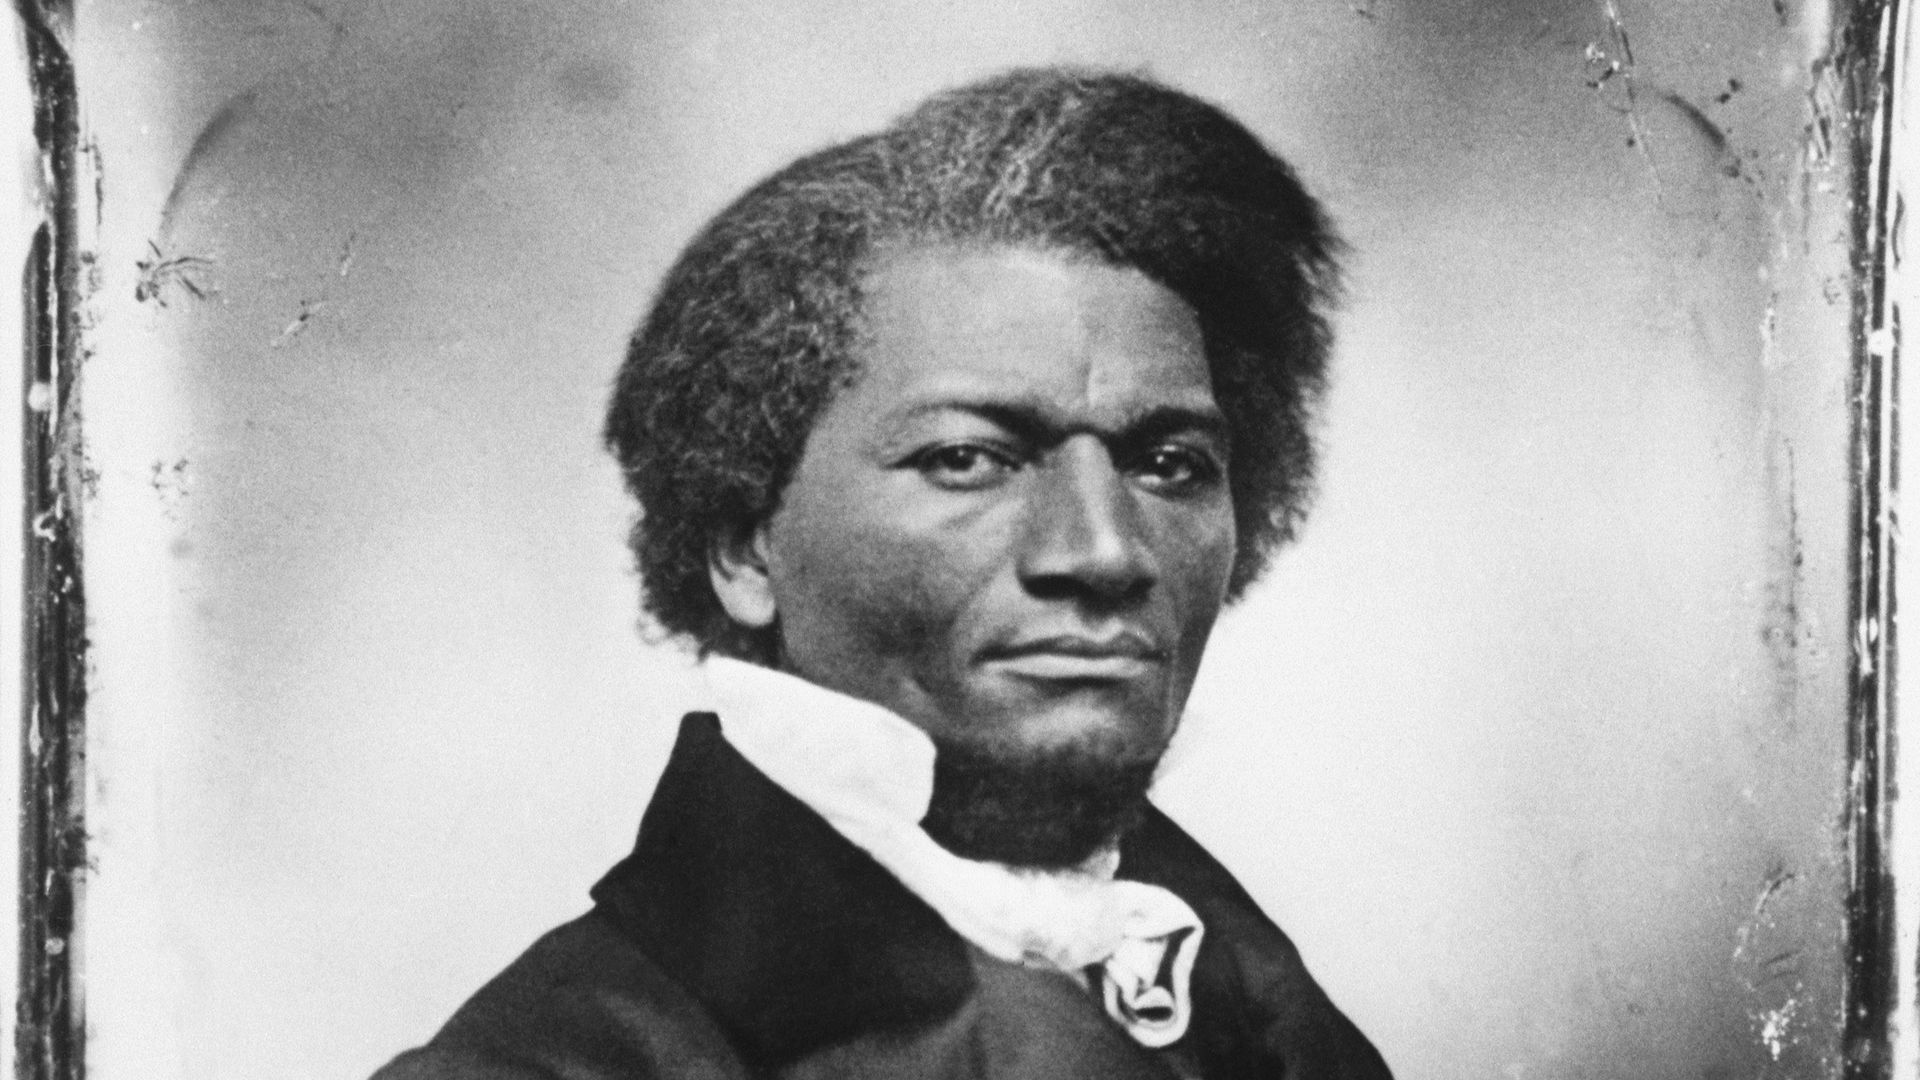 American writer and abolitionist Frederick Douglass stands for a portrait while looking at the camera.